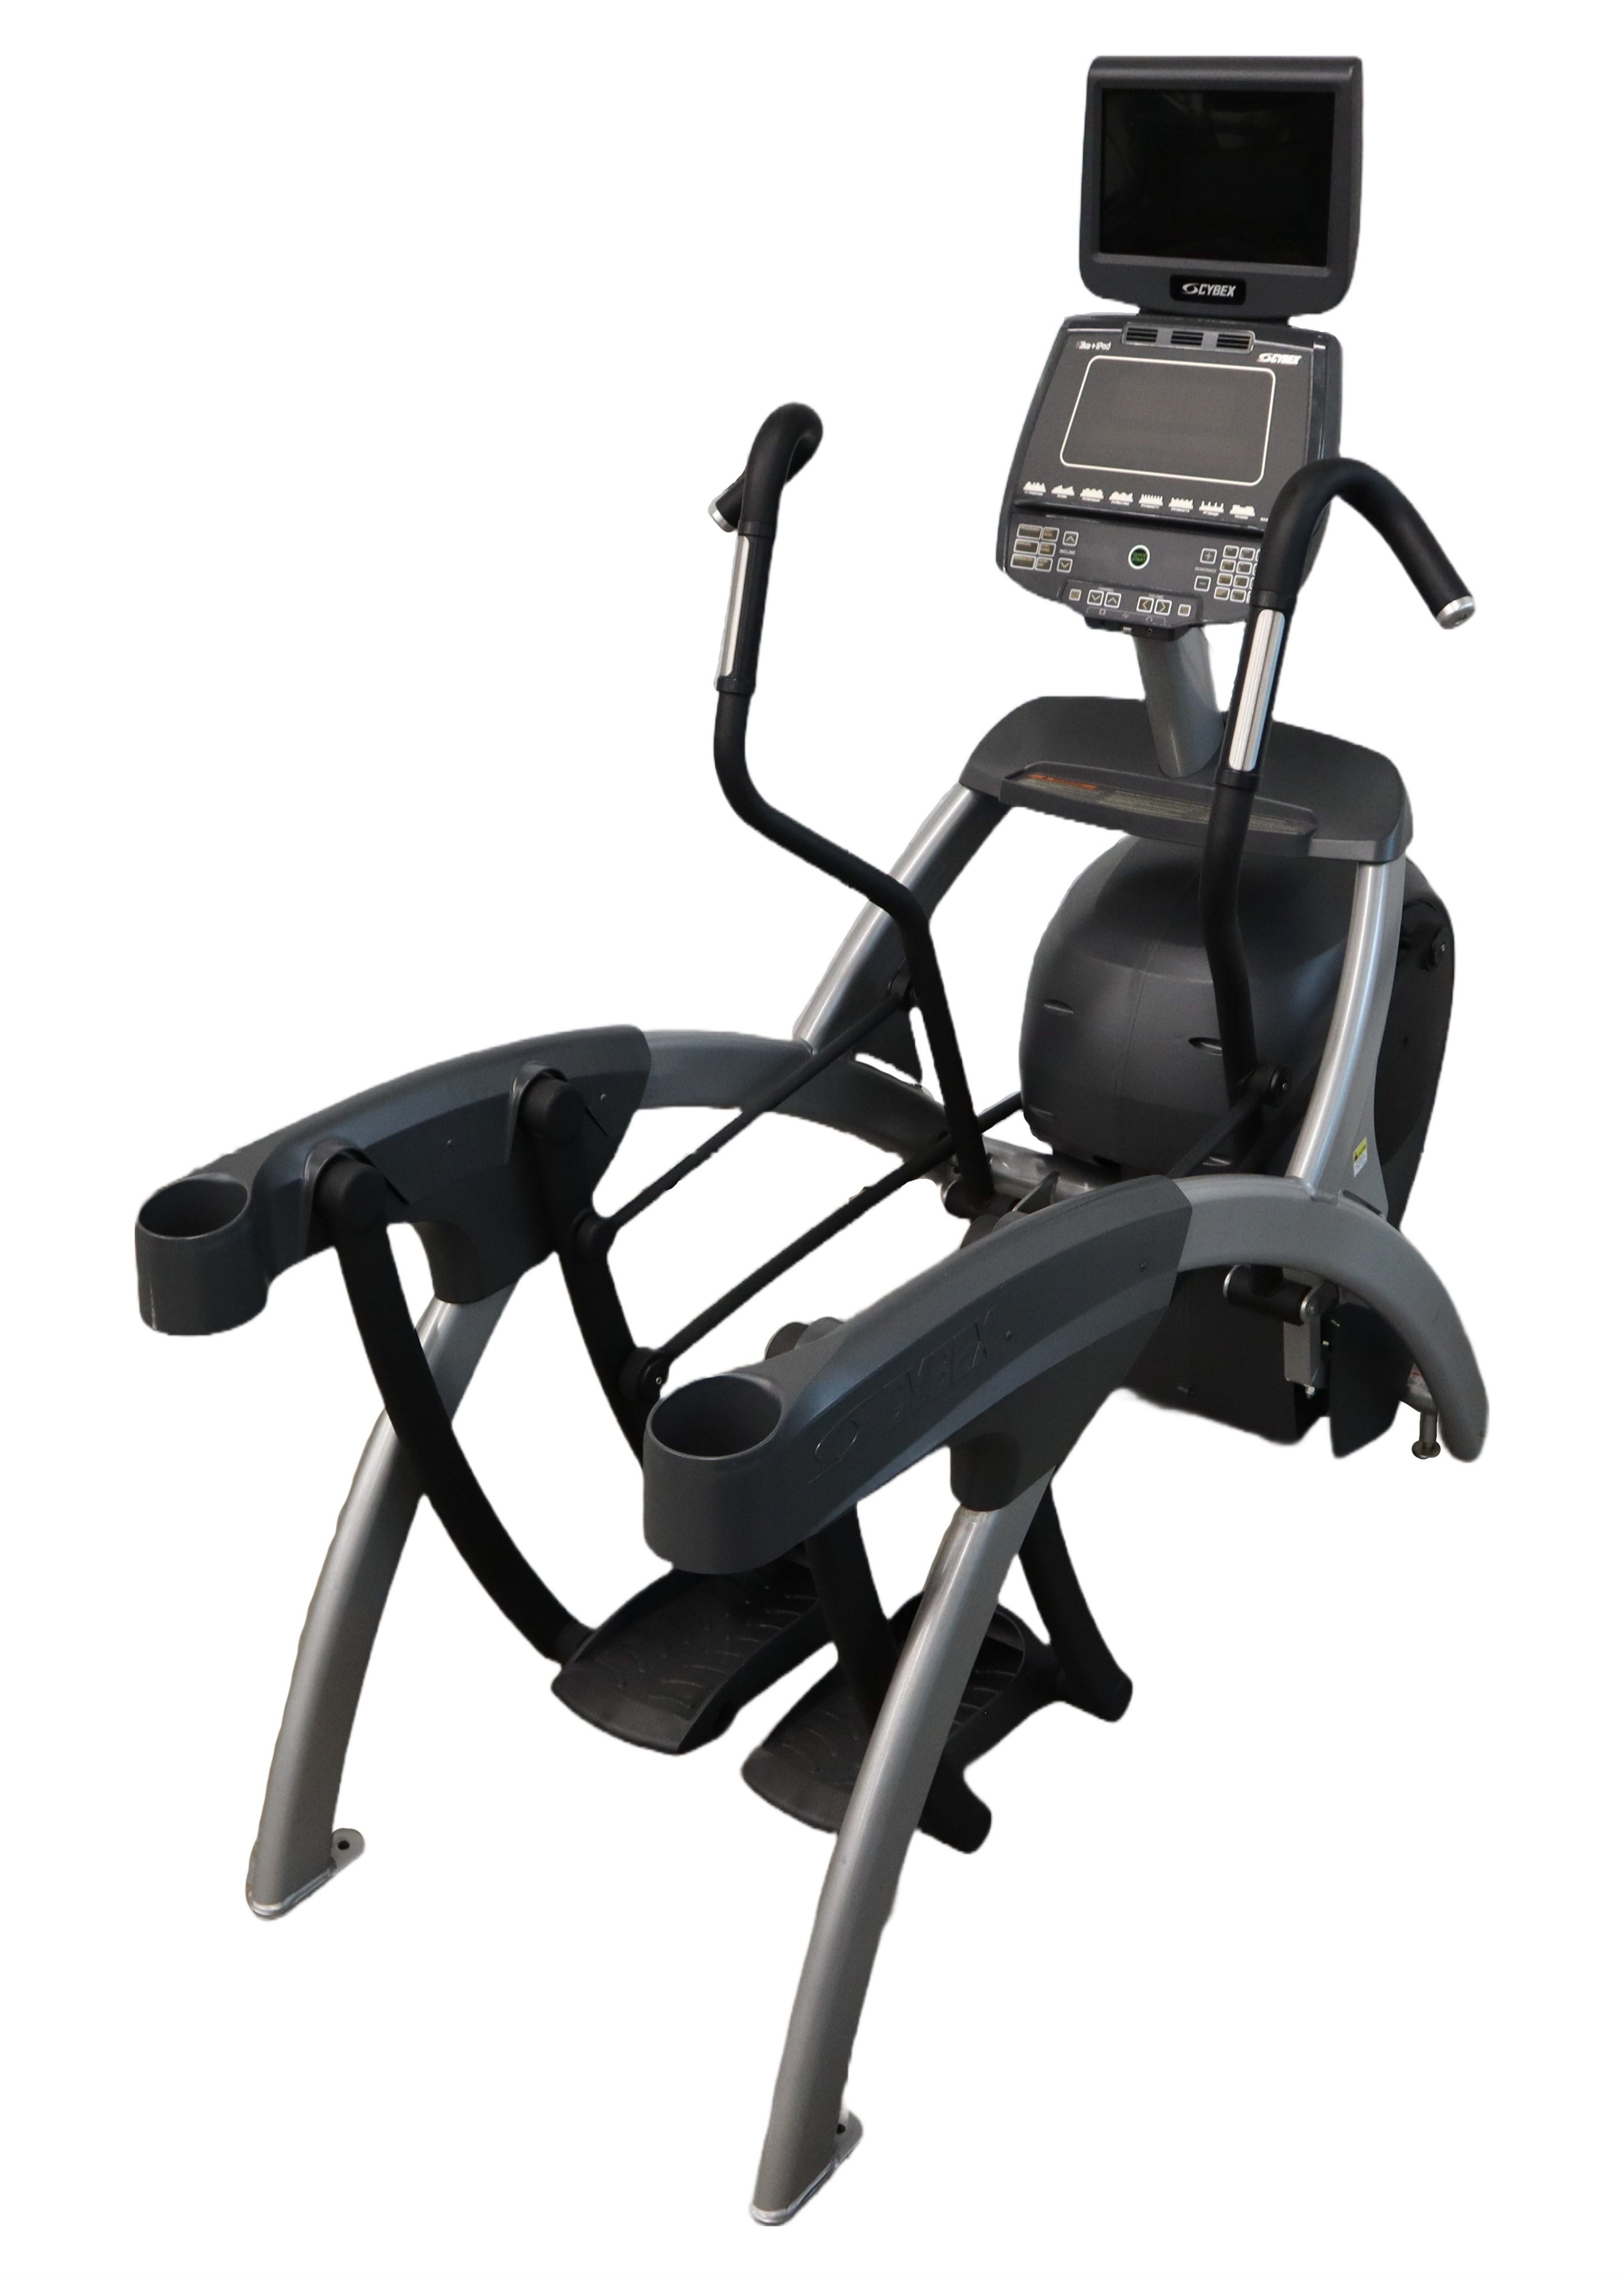 Used Cybex 750AT Total Body D11257 Arc Trainer Elliptical